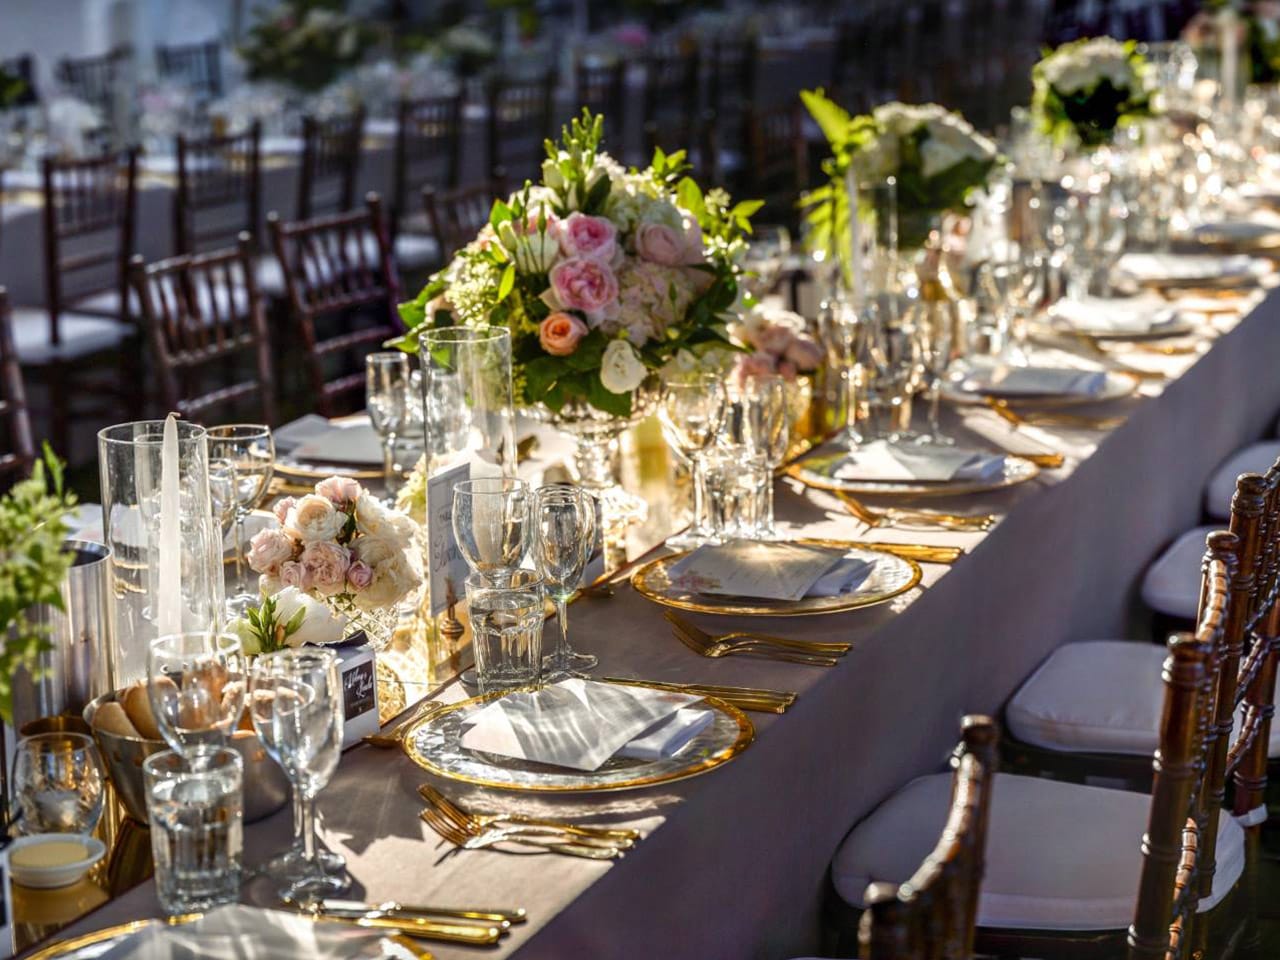 Long Table Wedding Setup With Flower Centerpieces And Decors